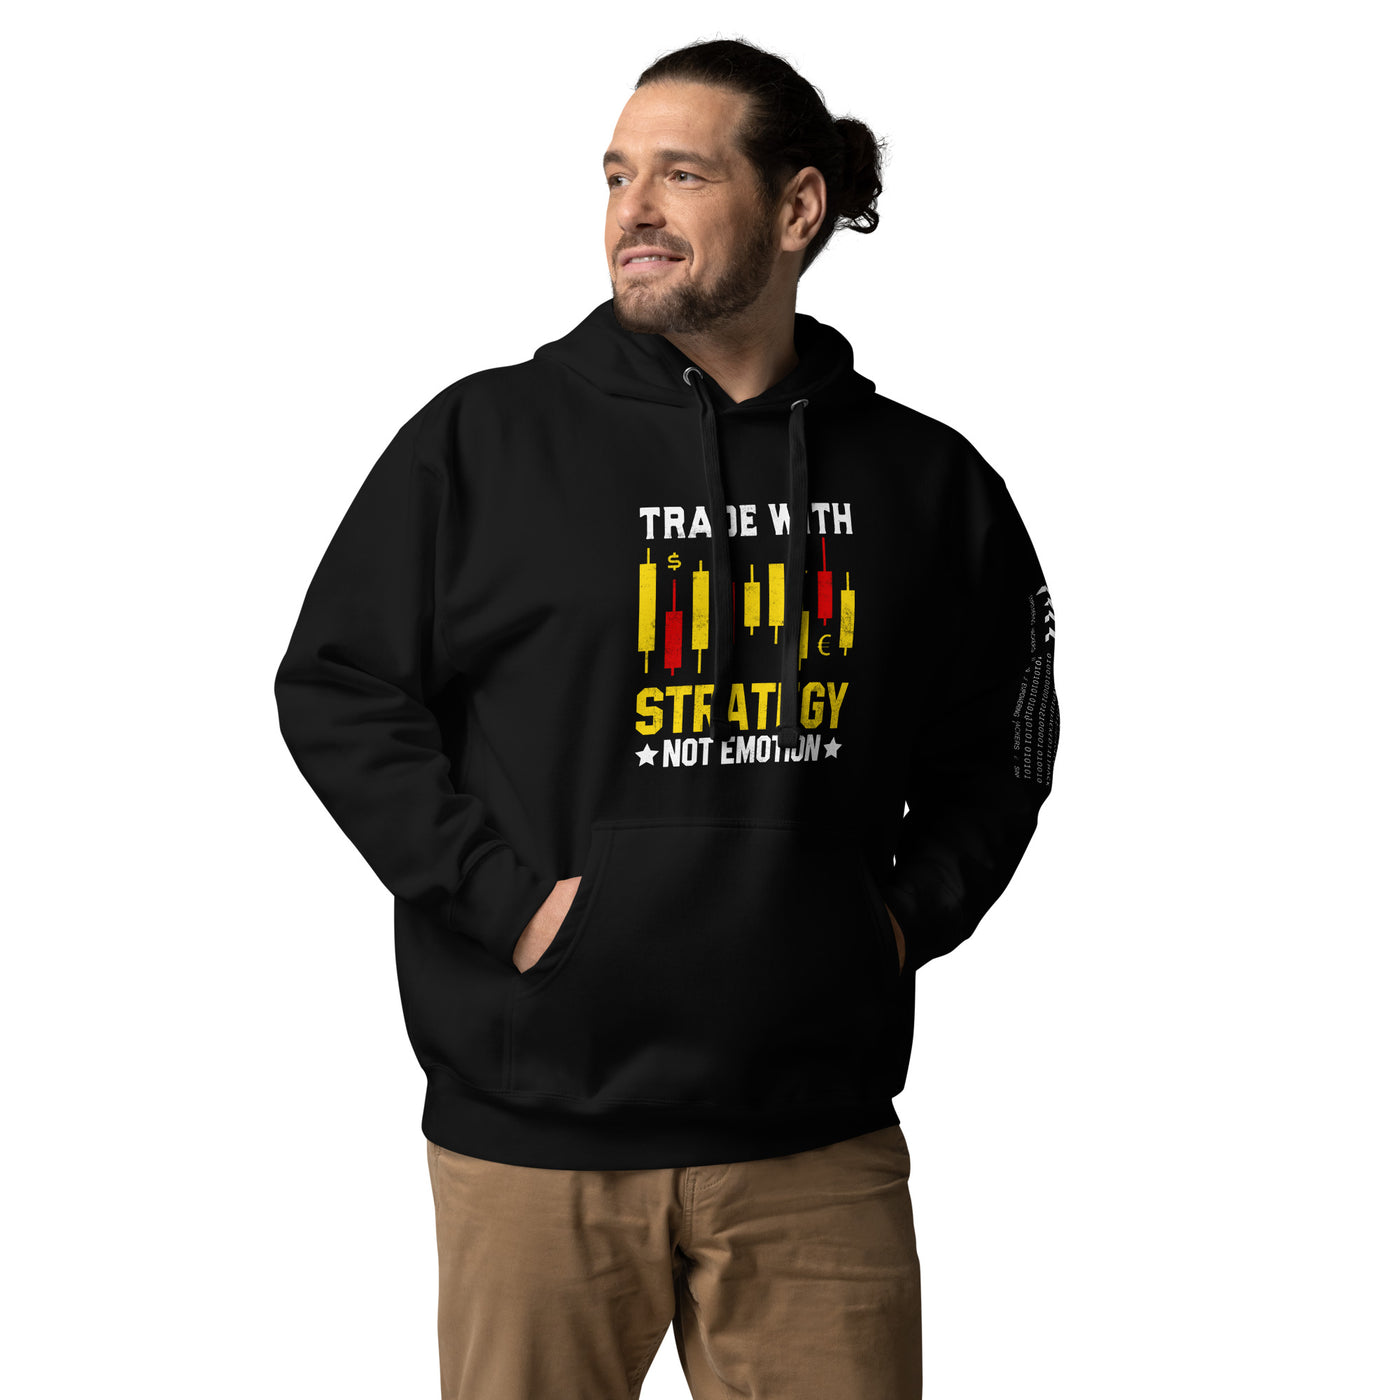 Trade with Strategy not Emotion - Unisex Hoodie